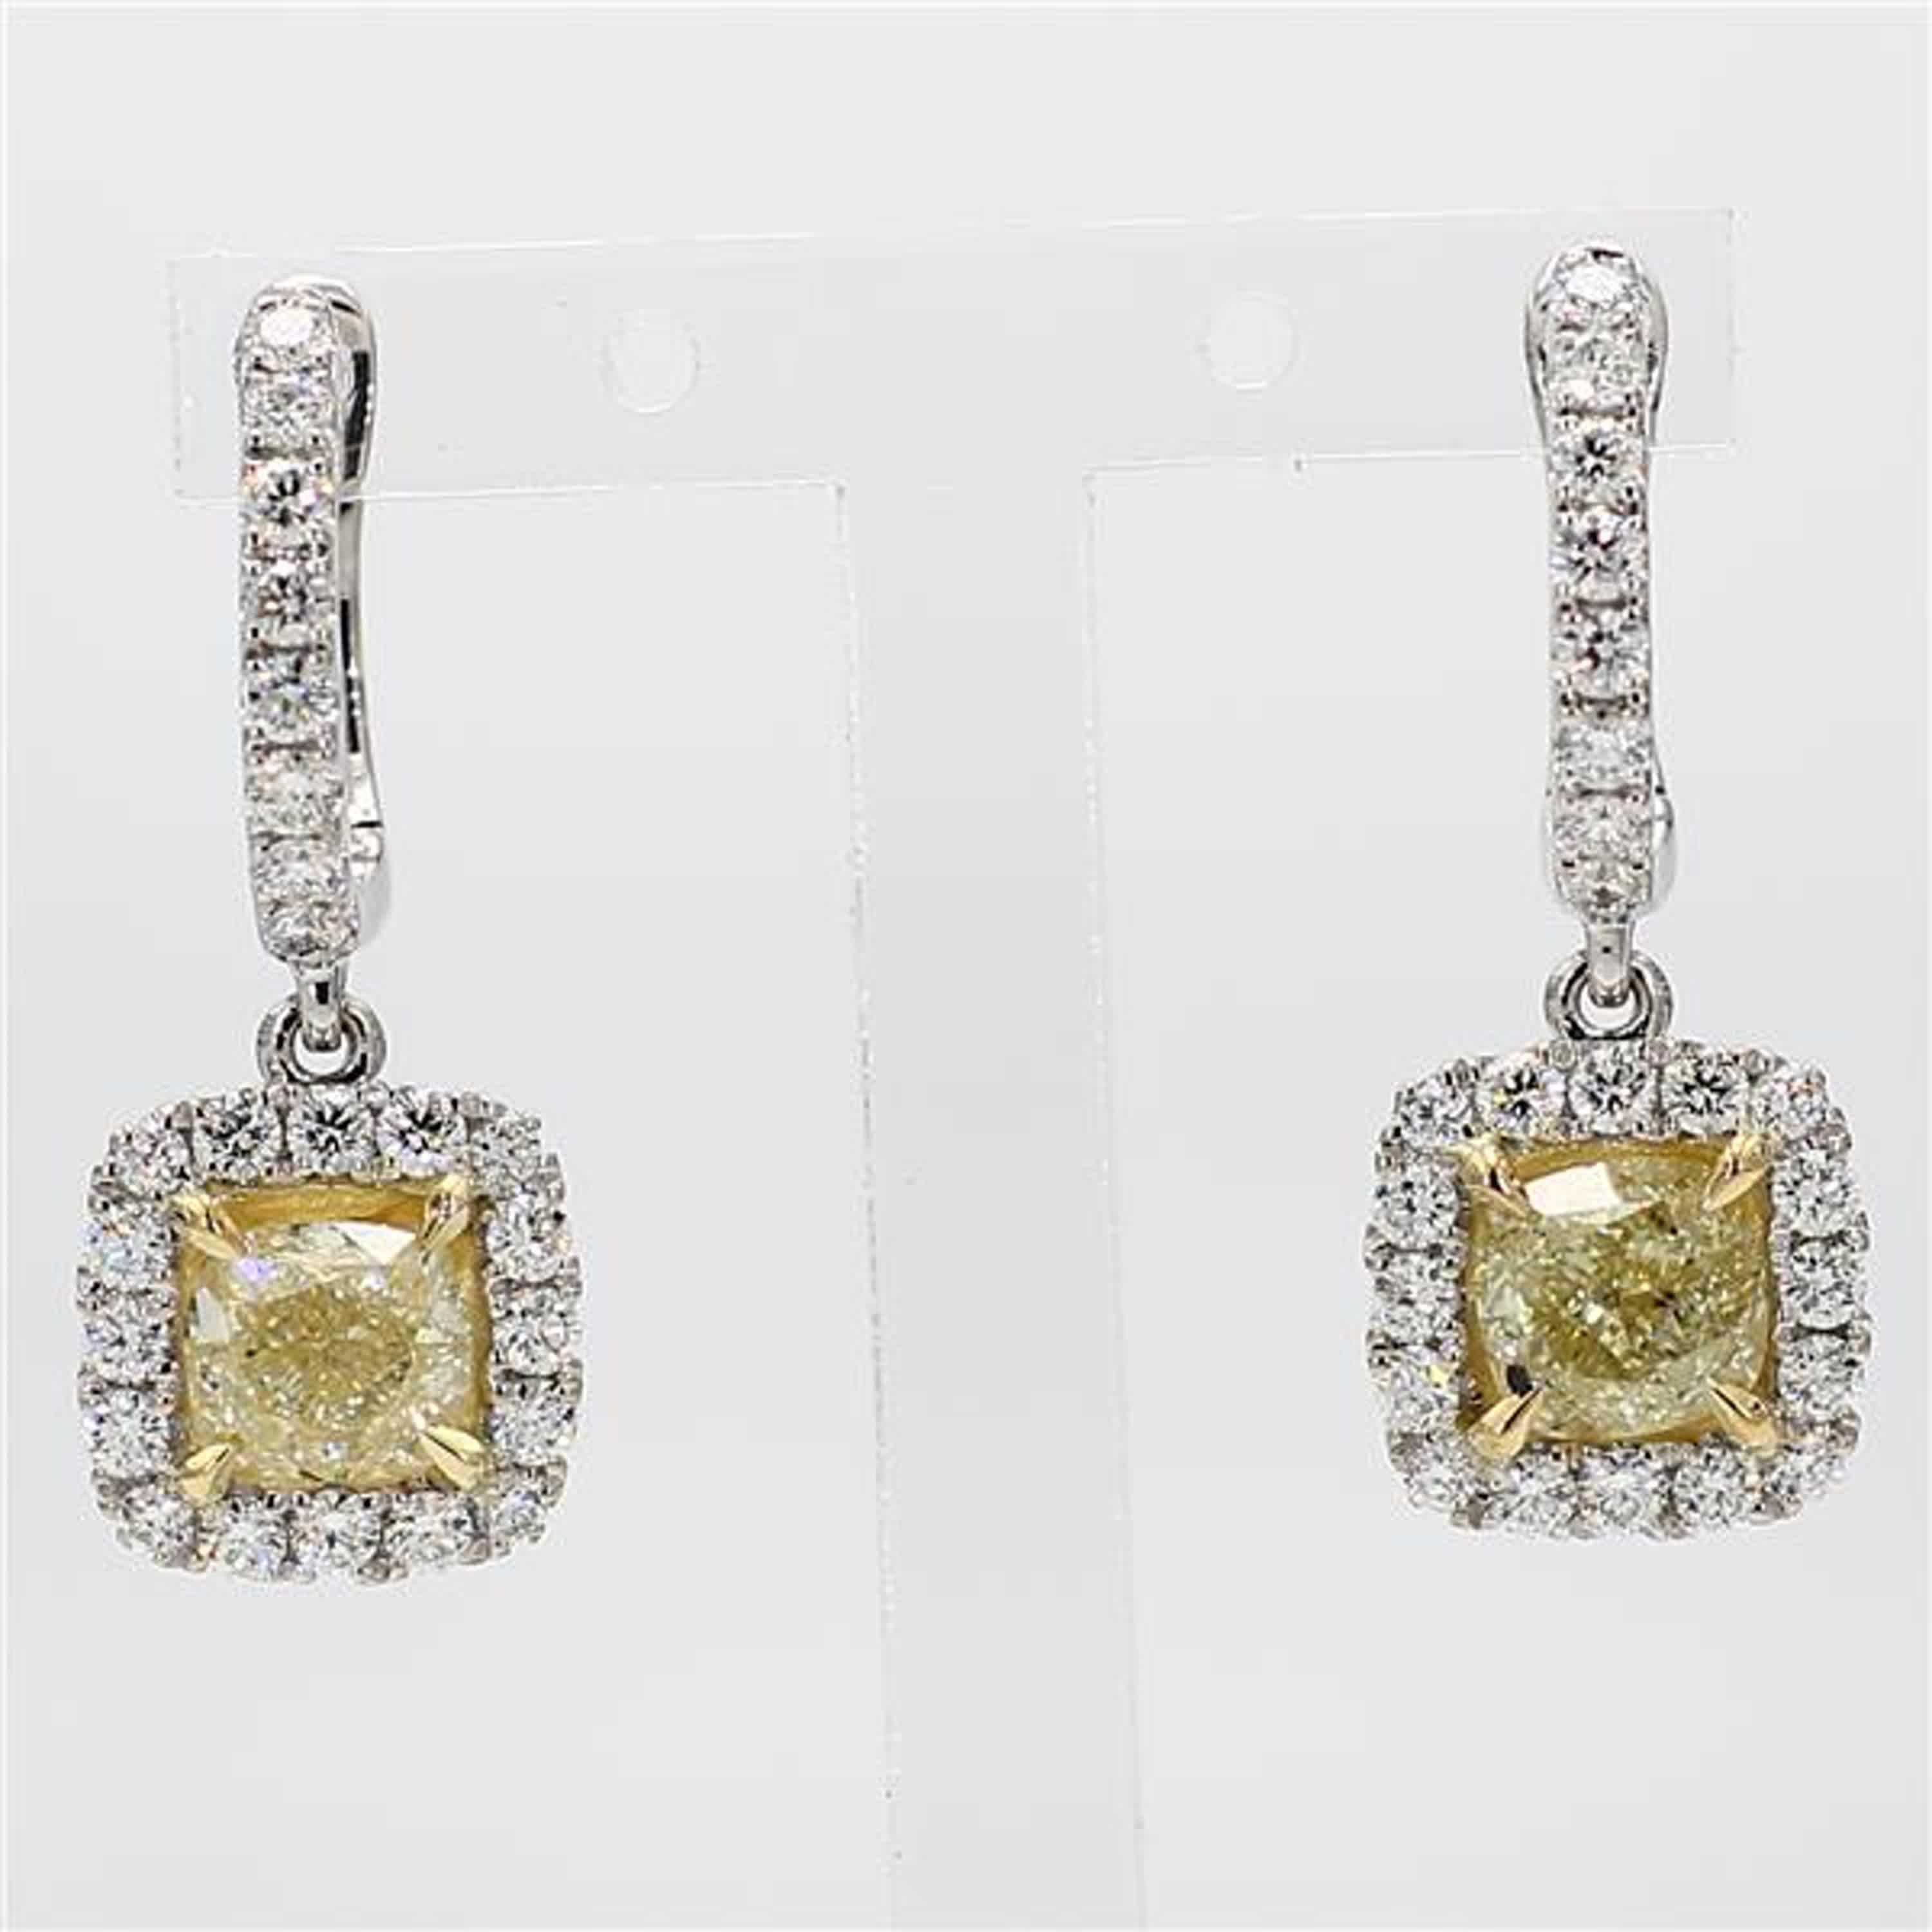 RareGemWorld's classic GIA certified diamond earrings. Mounted in a beautiful 18K Yellow and White Gold setting with natural cushion cut yellow diamonds. The yellow diamonds are surrounded by round natural white diamond melee. These earrings are